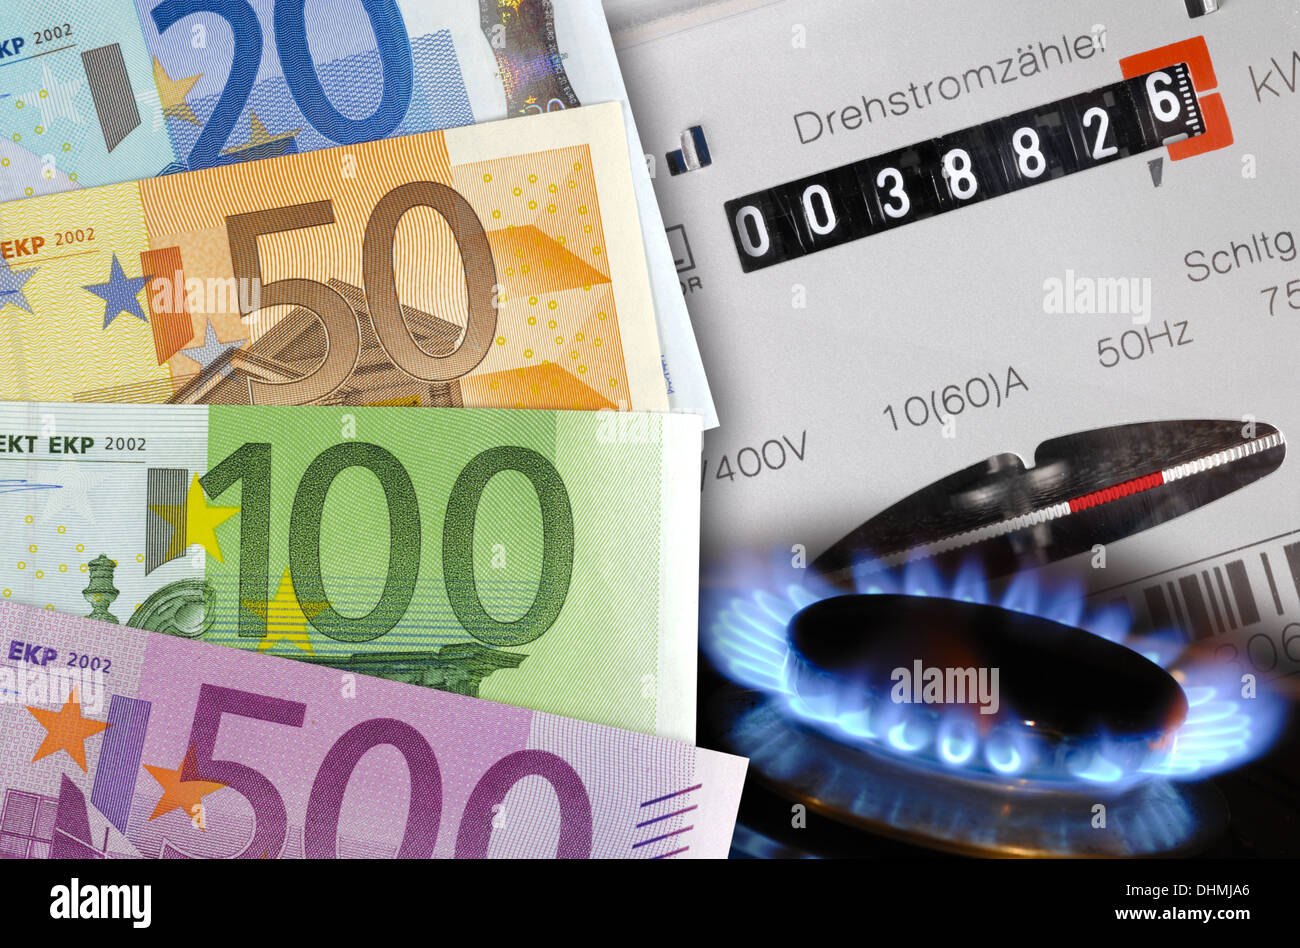 costs for energy with euro currency Stock Photo